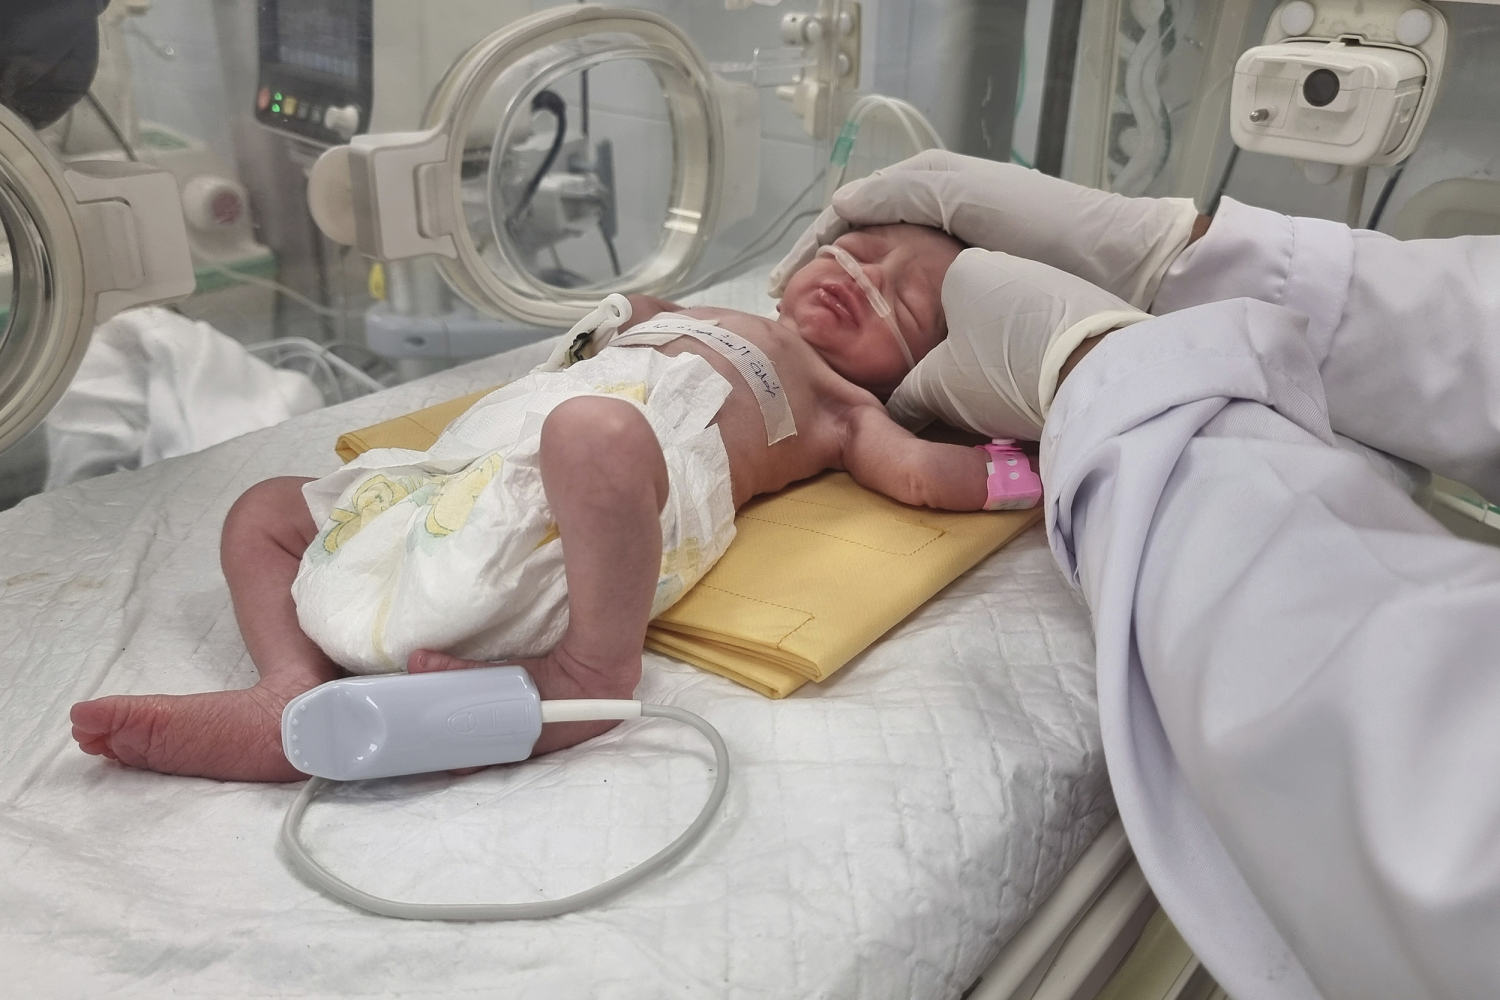 Orphaned by an airstrike and saved from her dead mother's womb, baby Sabreen has died